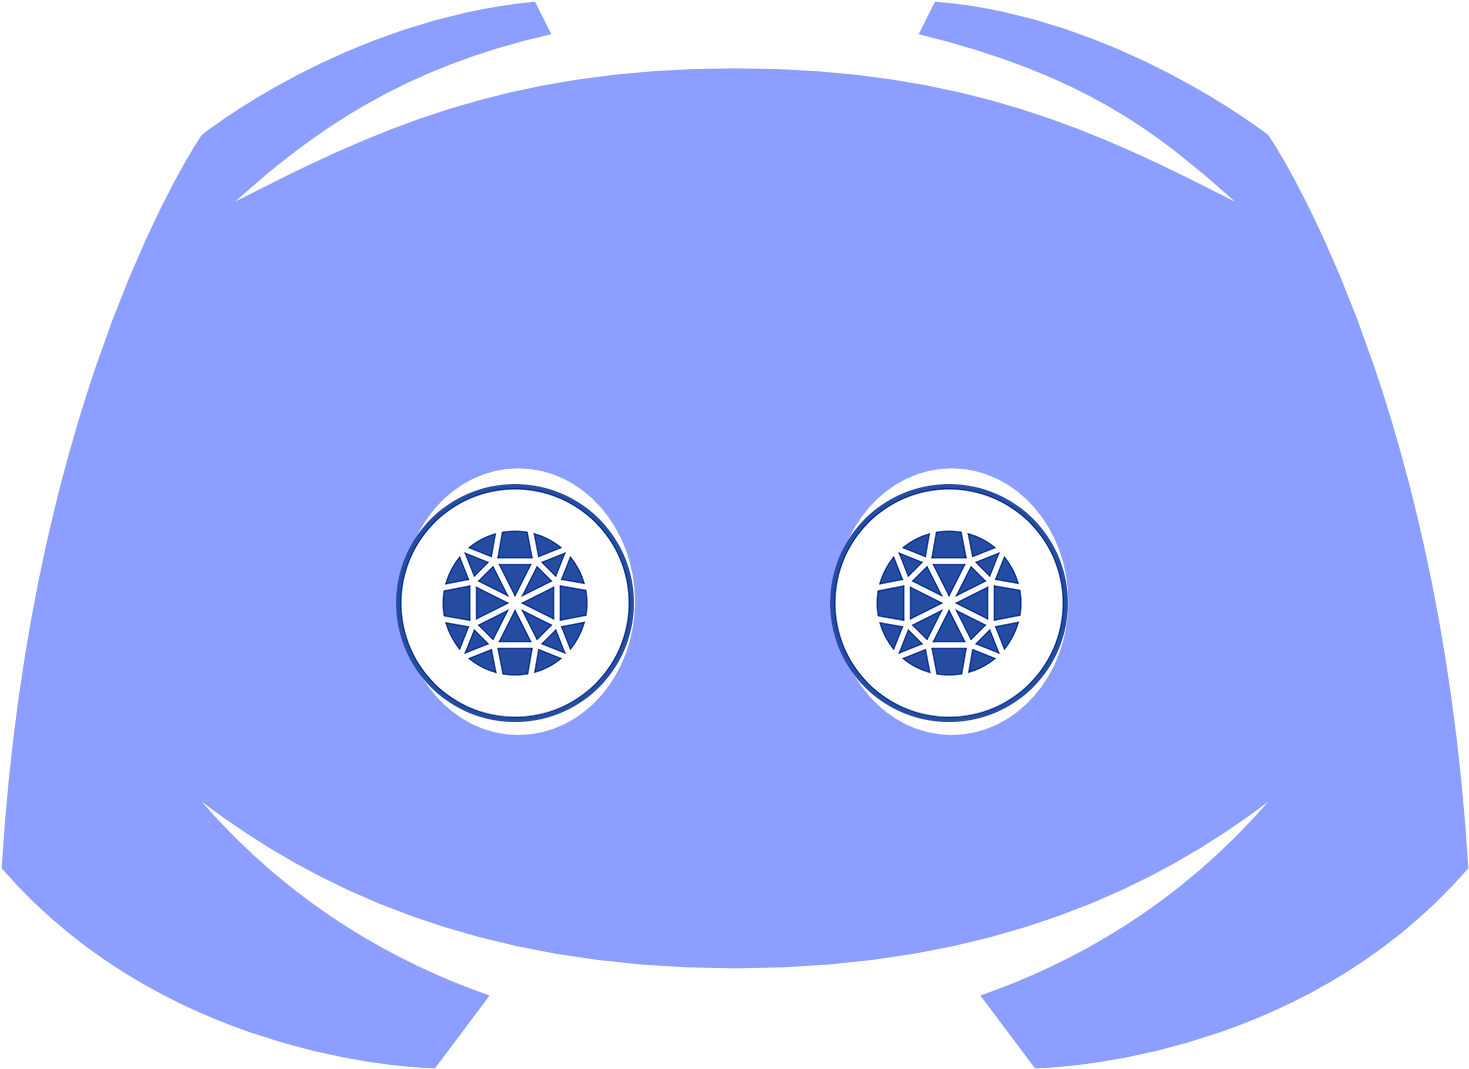 A Blue Cartoon Face With White Eyes